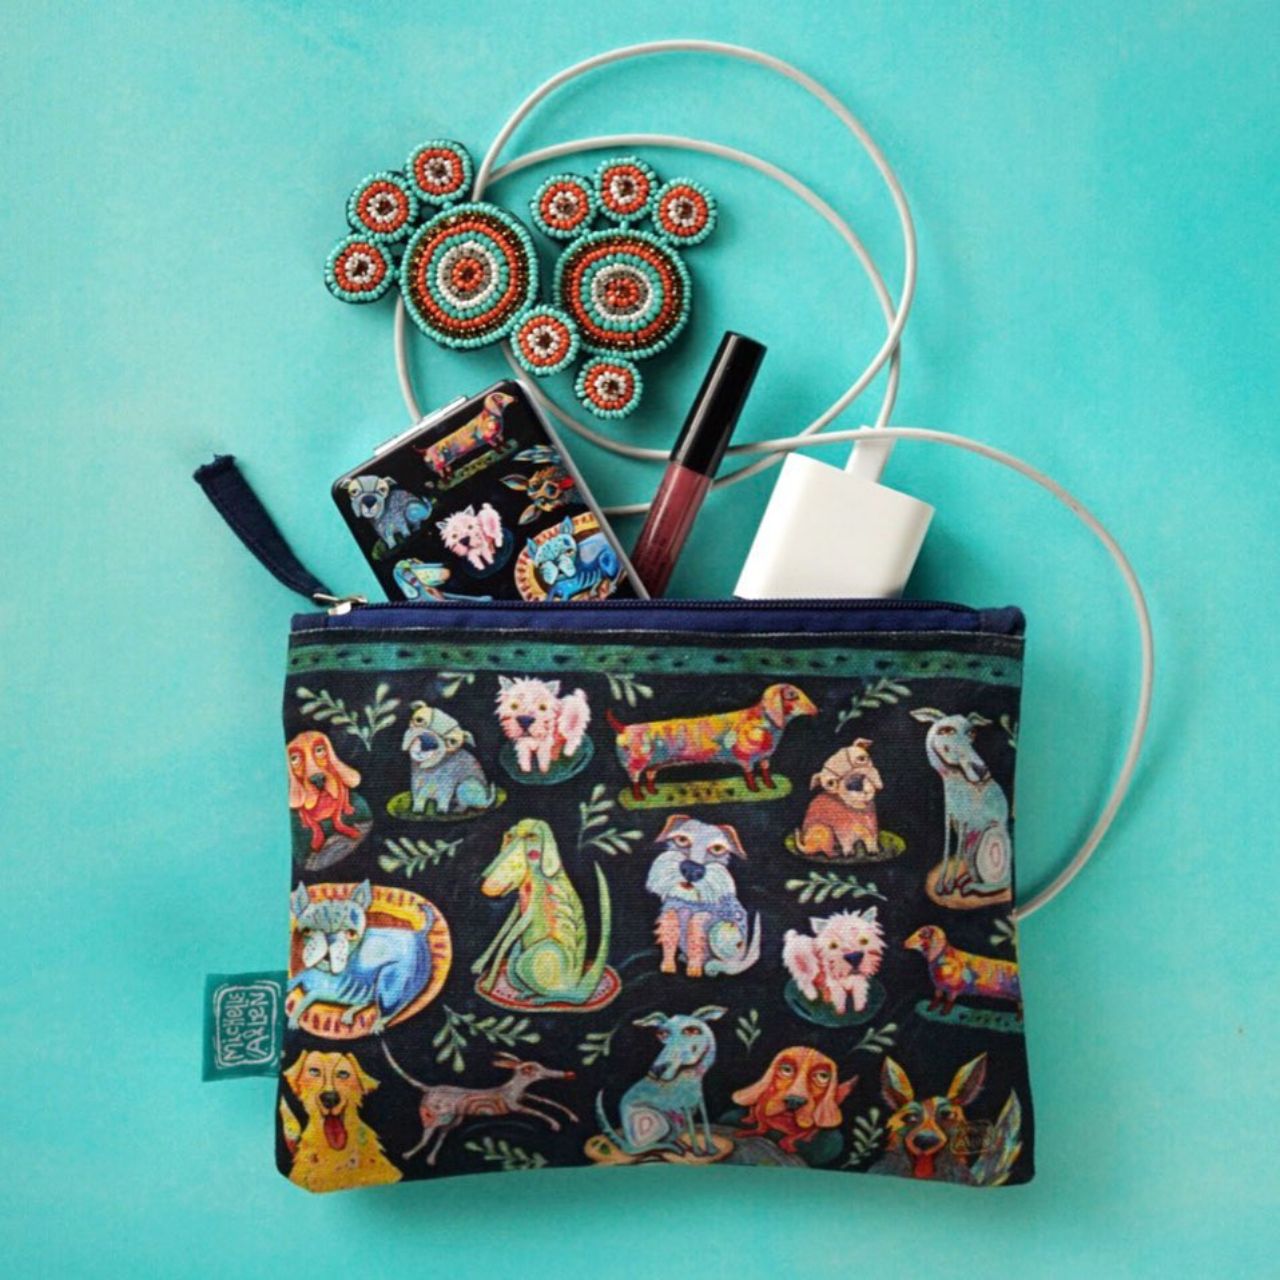 Dog Park Zipped Pouch Large by Allen Design  These beautiful zippered 100% Cotton pouches are perfect for pencils/pens, trinkets, charging cords, make up or pretty much anything you can possibly think of. Exclusively designed by Michelle Allen.